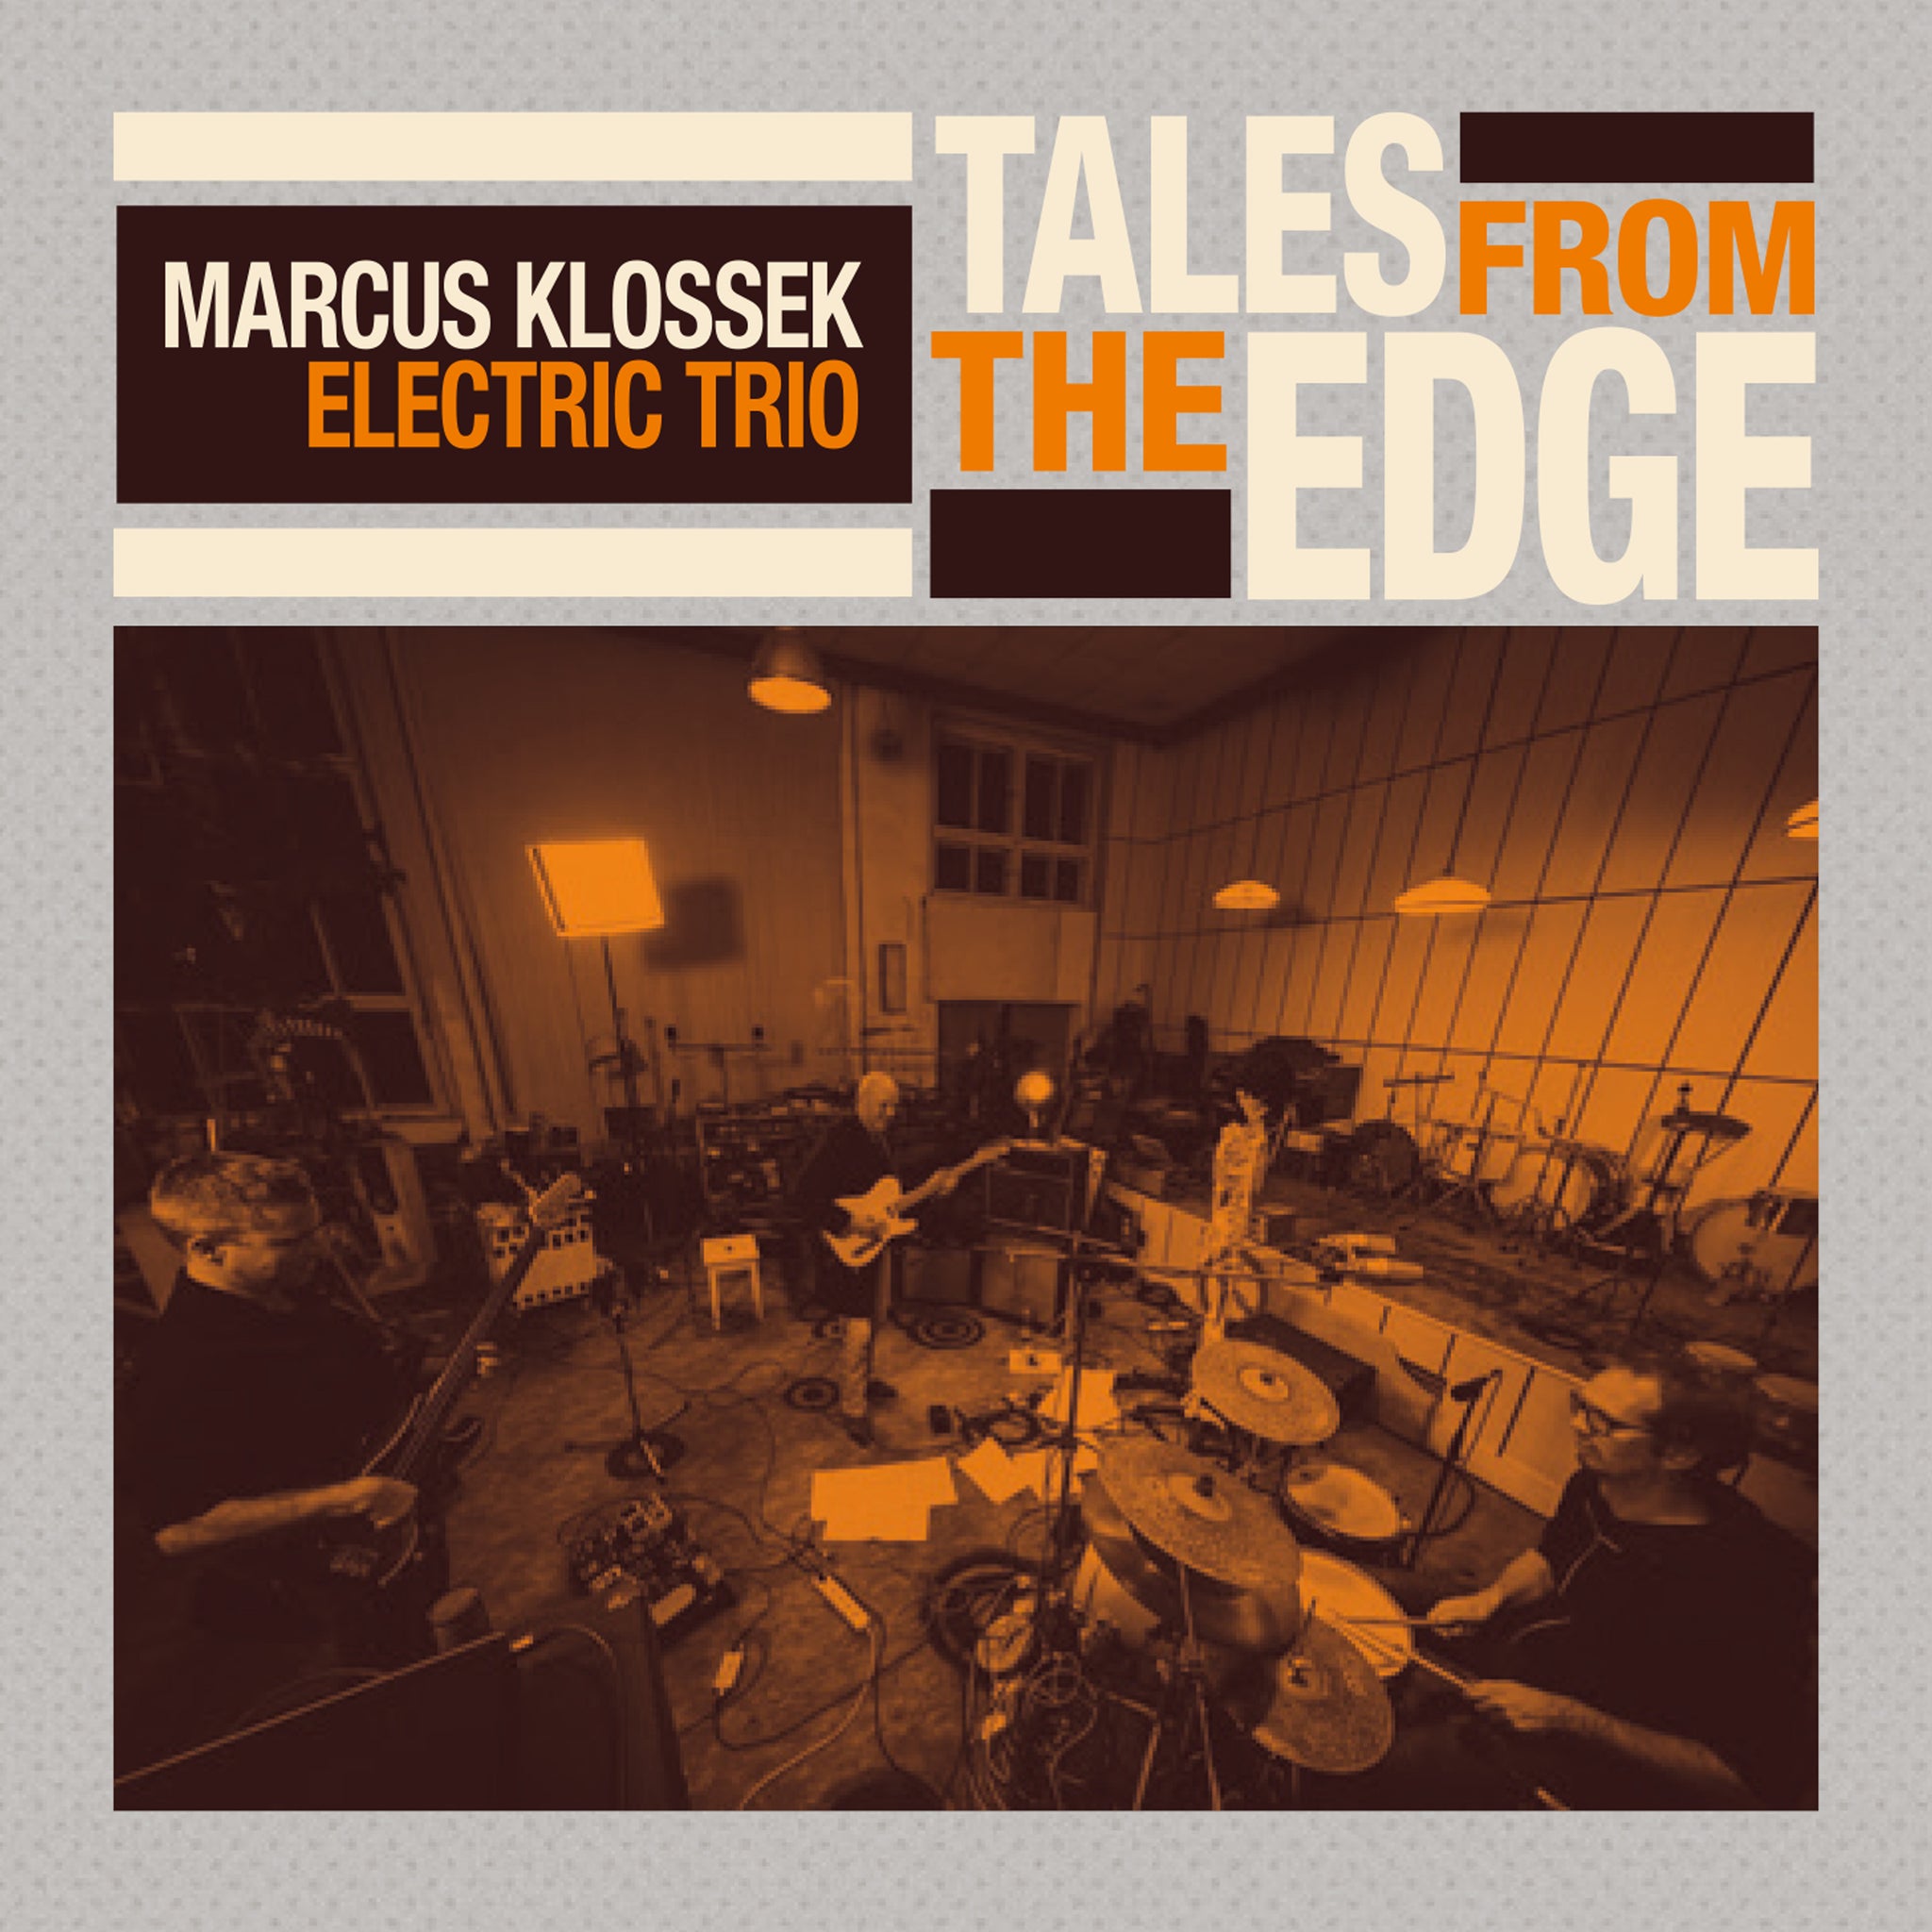 Marcus Klossek Electic Trio: Tales from the Edge